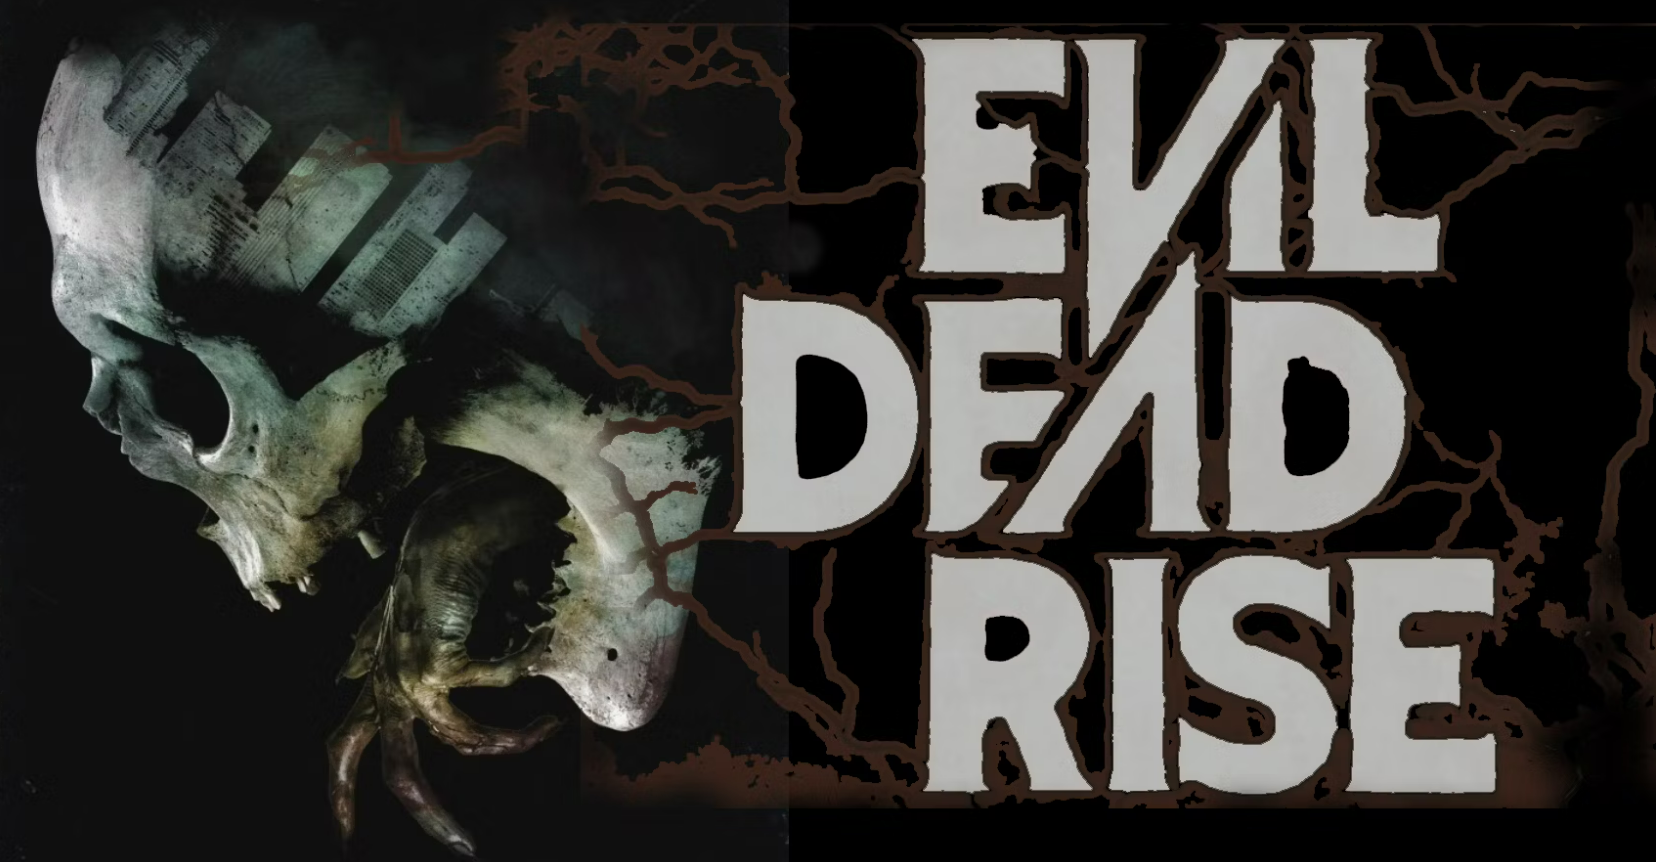 Evil Dead Rise' Review: An Imaginatively Scary Franchise Extension